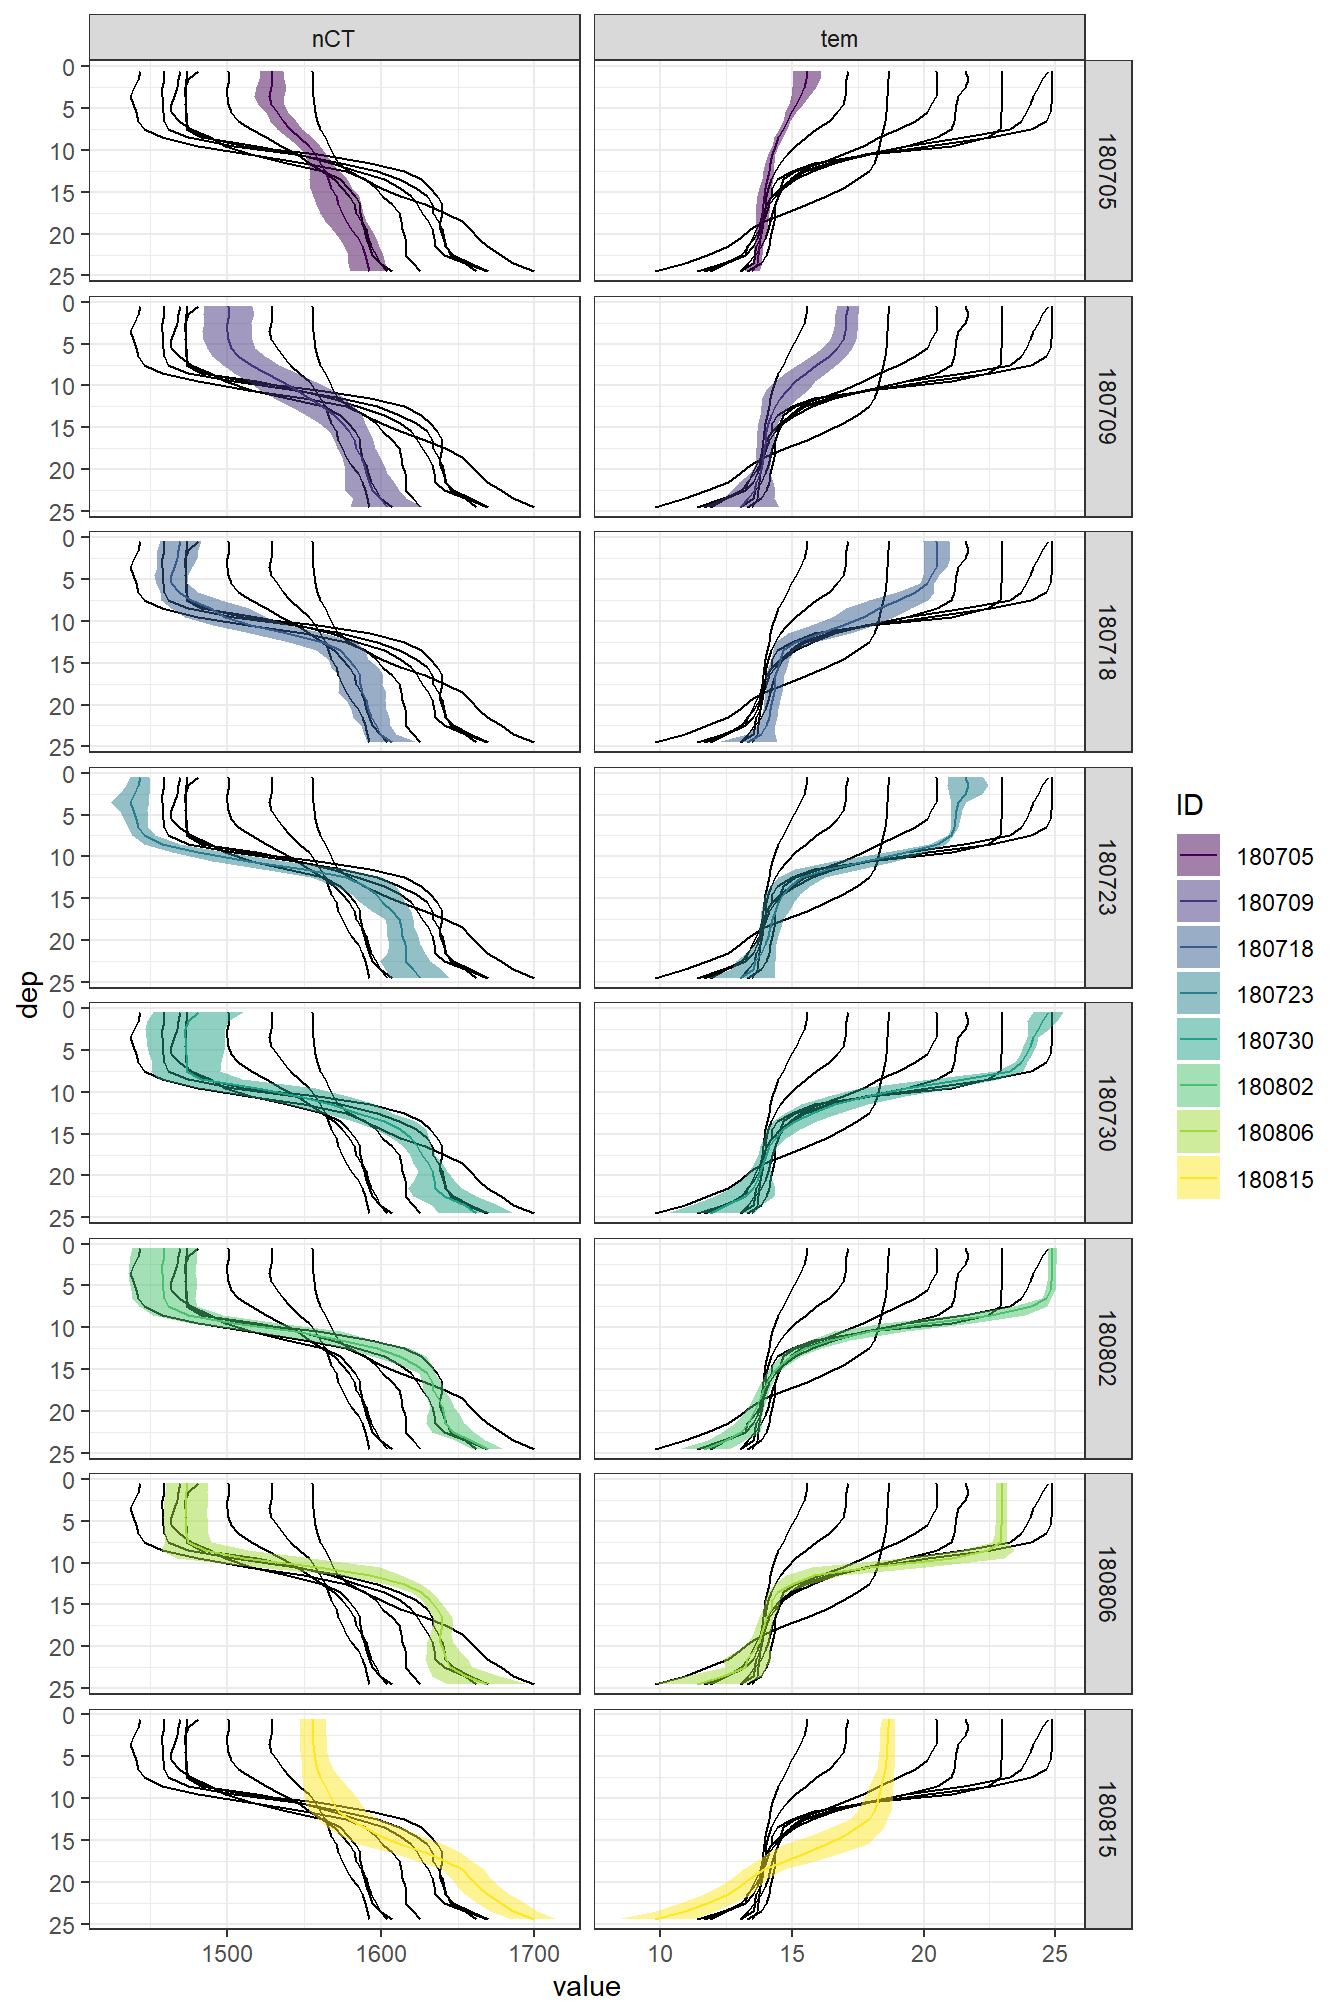 Mean vertical profiles per cruise day across all stations plotted indivdually. Ribbons indicate the standard deviation observed across all profiles at each depth and transect.